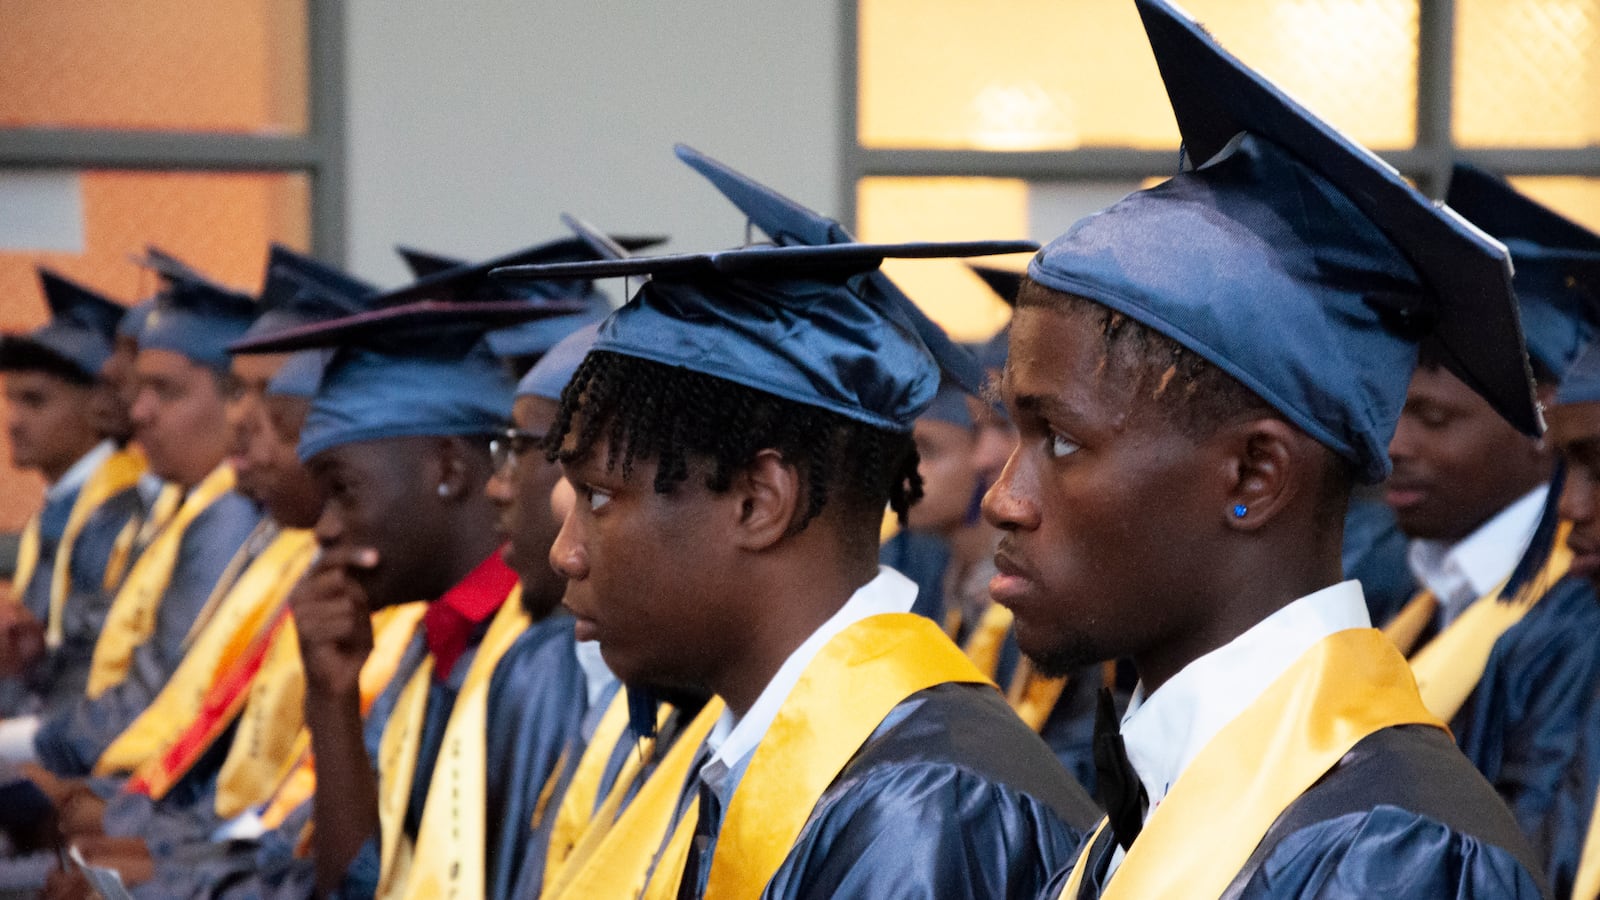 Eagle Academy for Young Men celebrated its first graduating class this year. The school opened in 2012 and graduated a class of 42 this week.